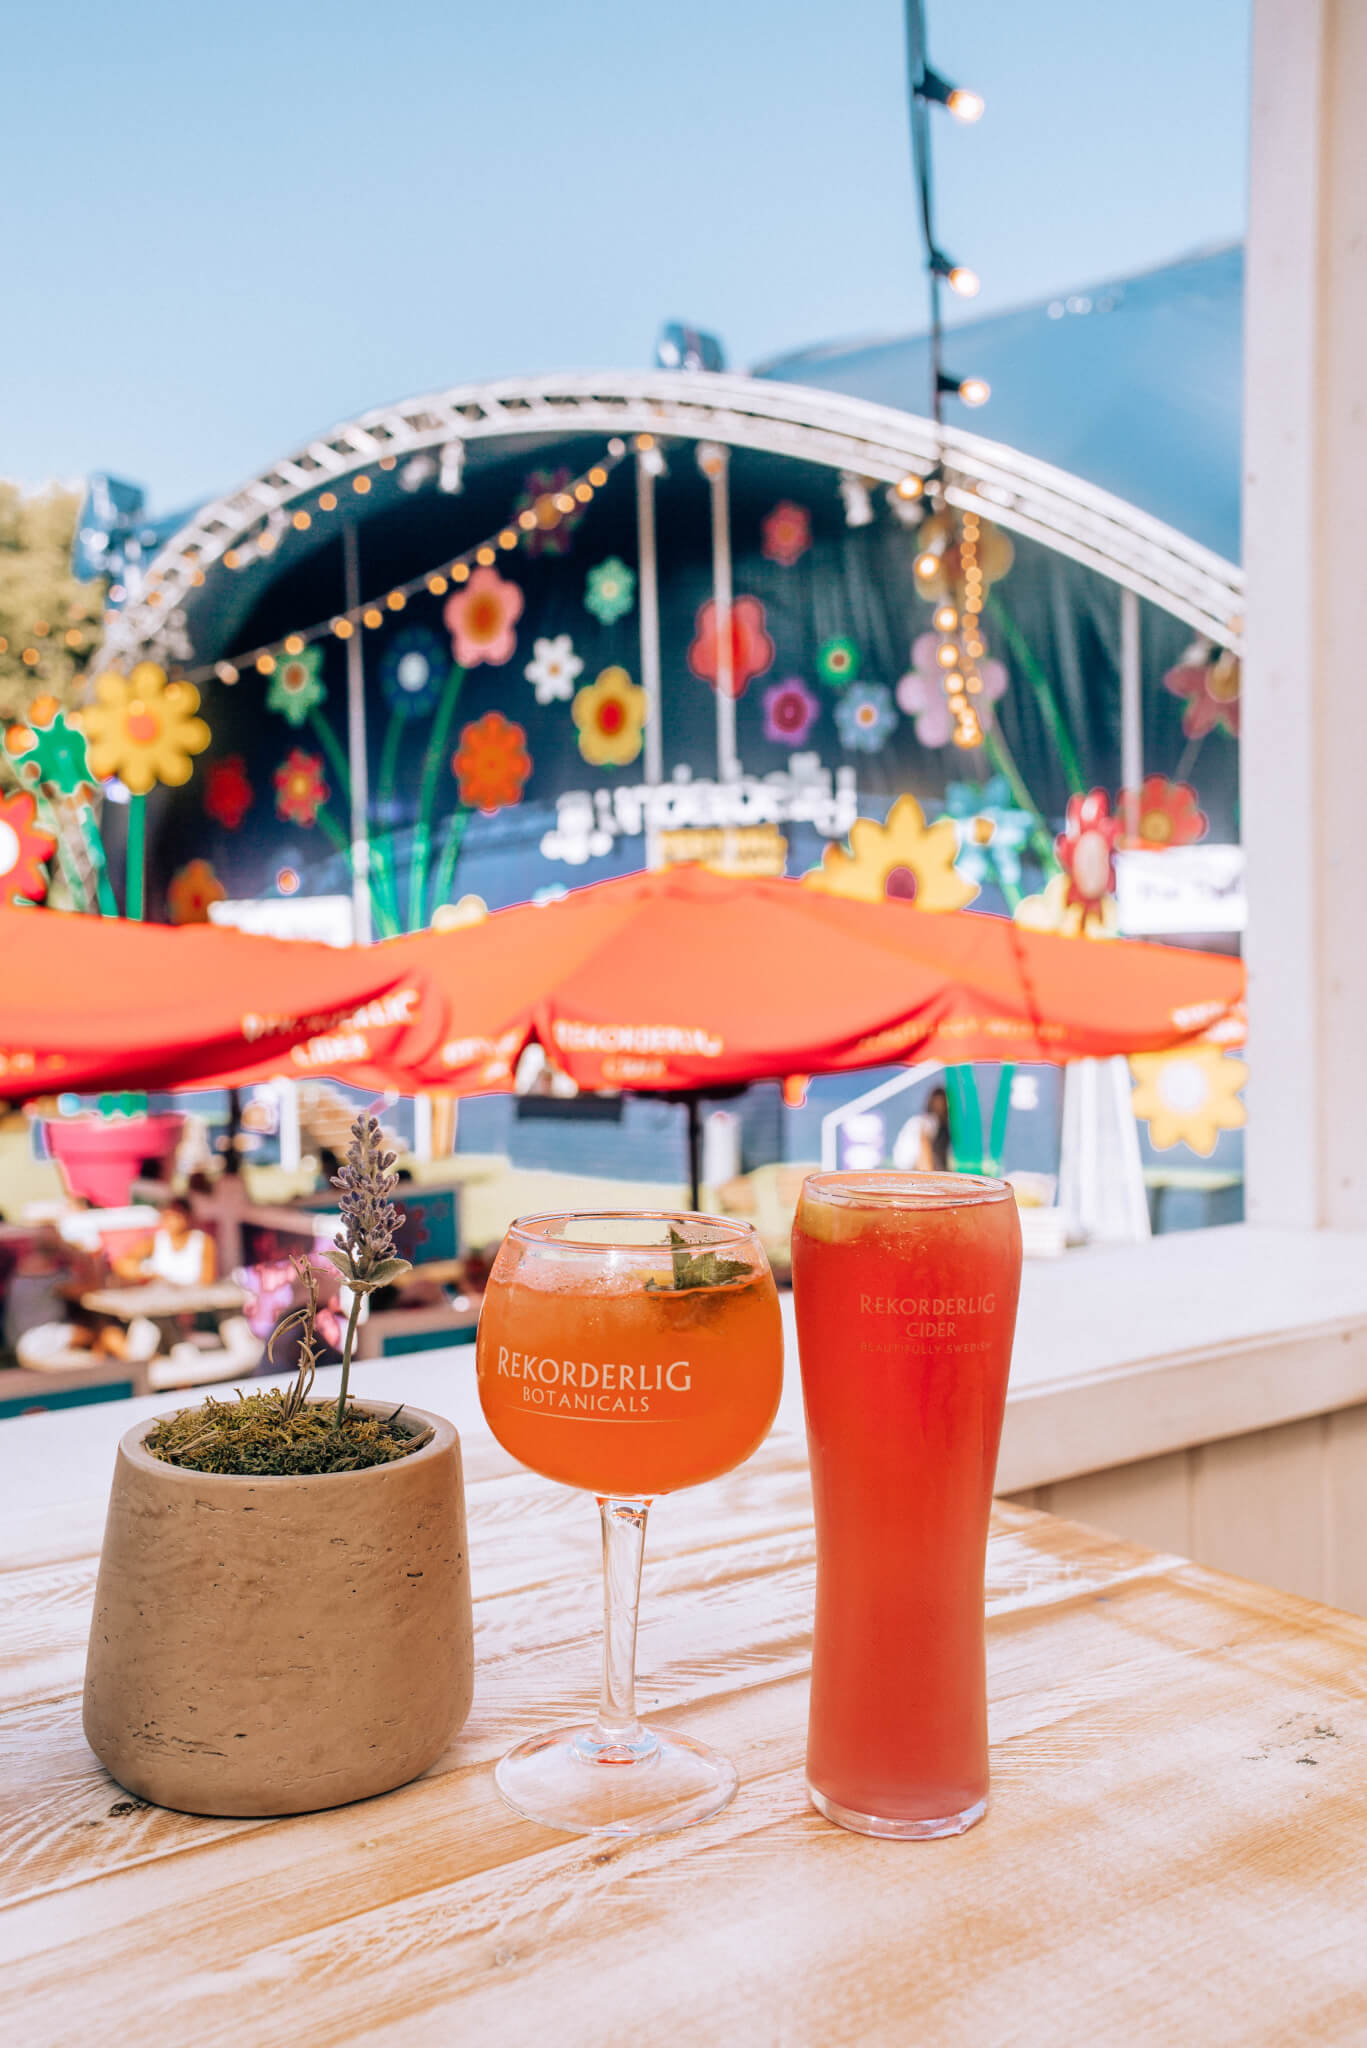 Rekorderlig-Botanicals-Bar-6-of-10 What to do in London this summer